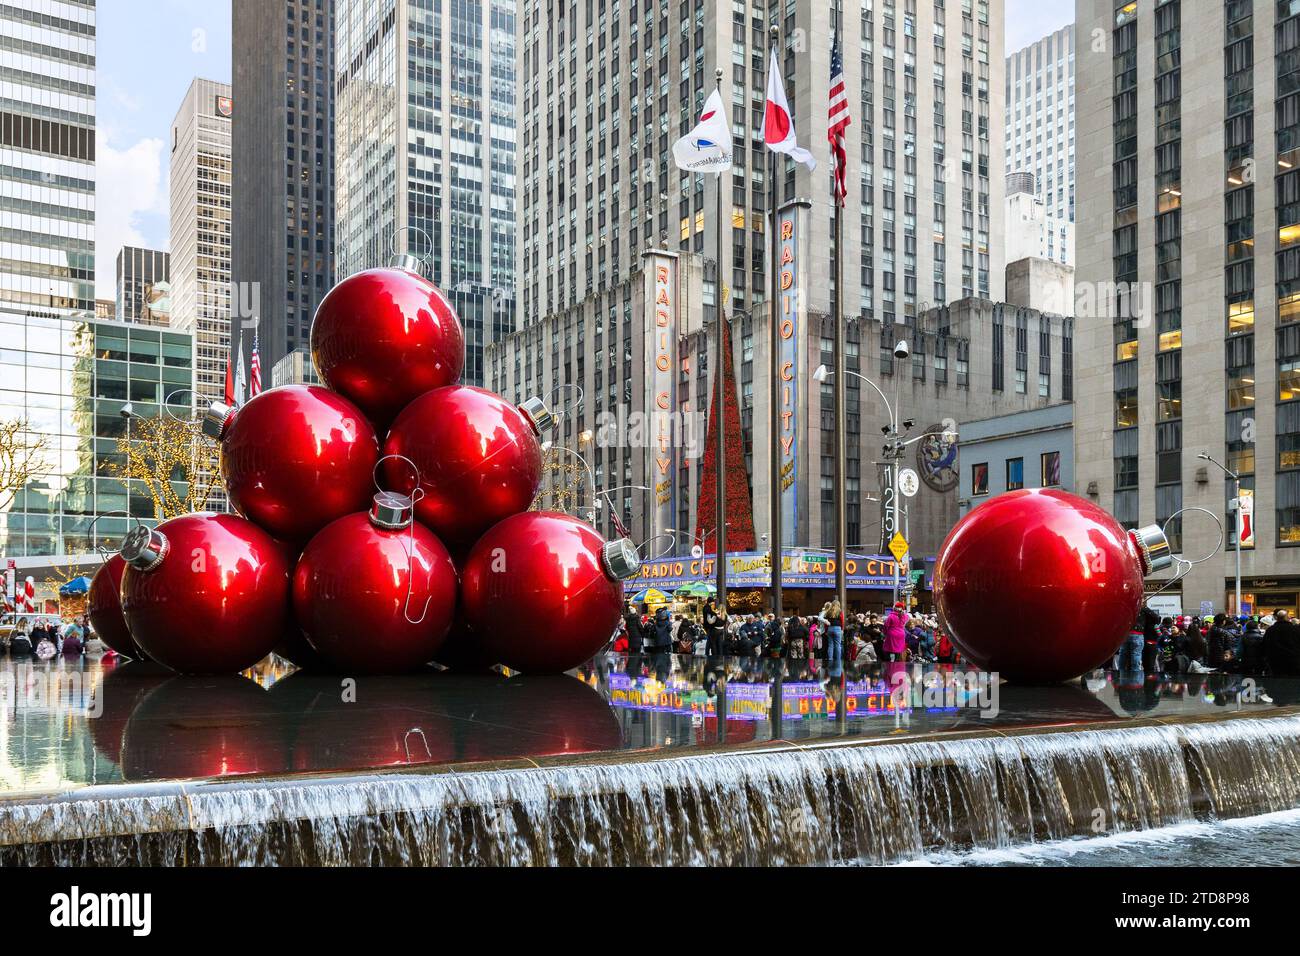 The Giant Red Ornaments and Radio City Music Hall during Christmas time in Midtown Manhattan. Stock Photo